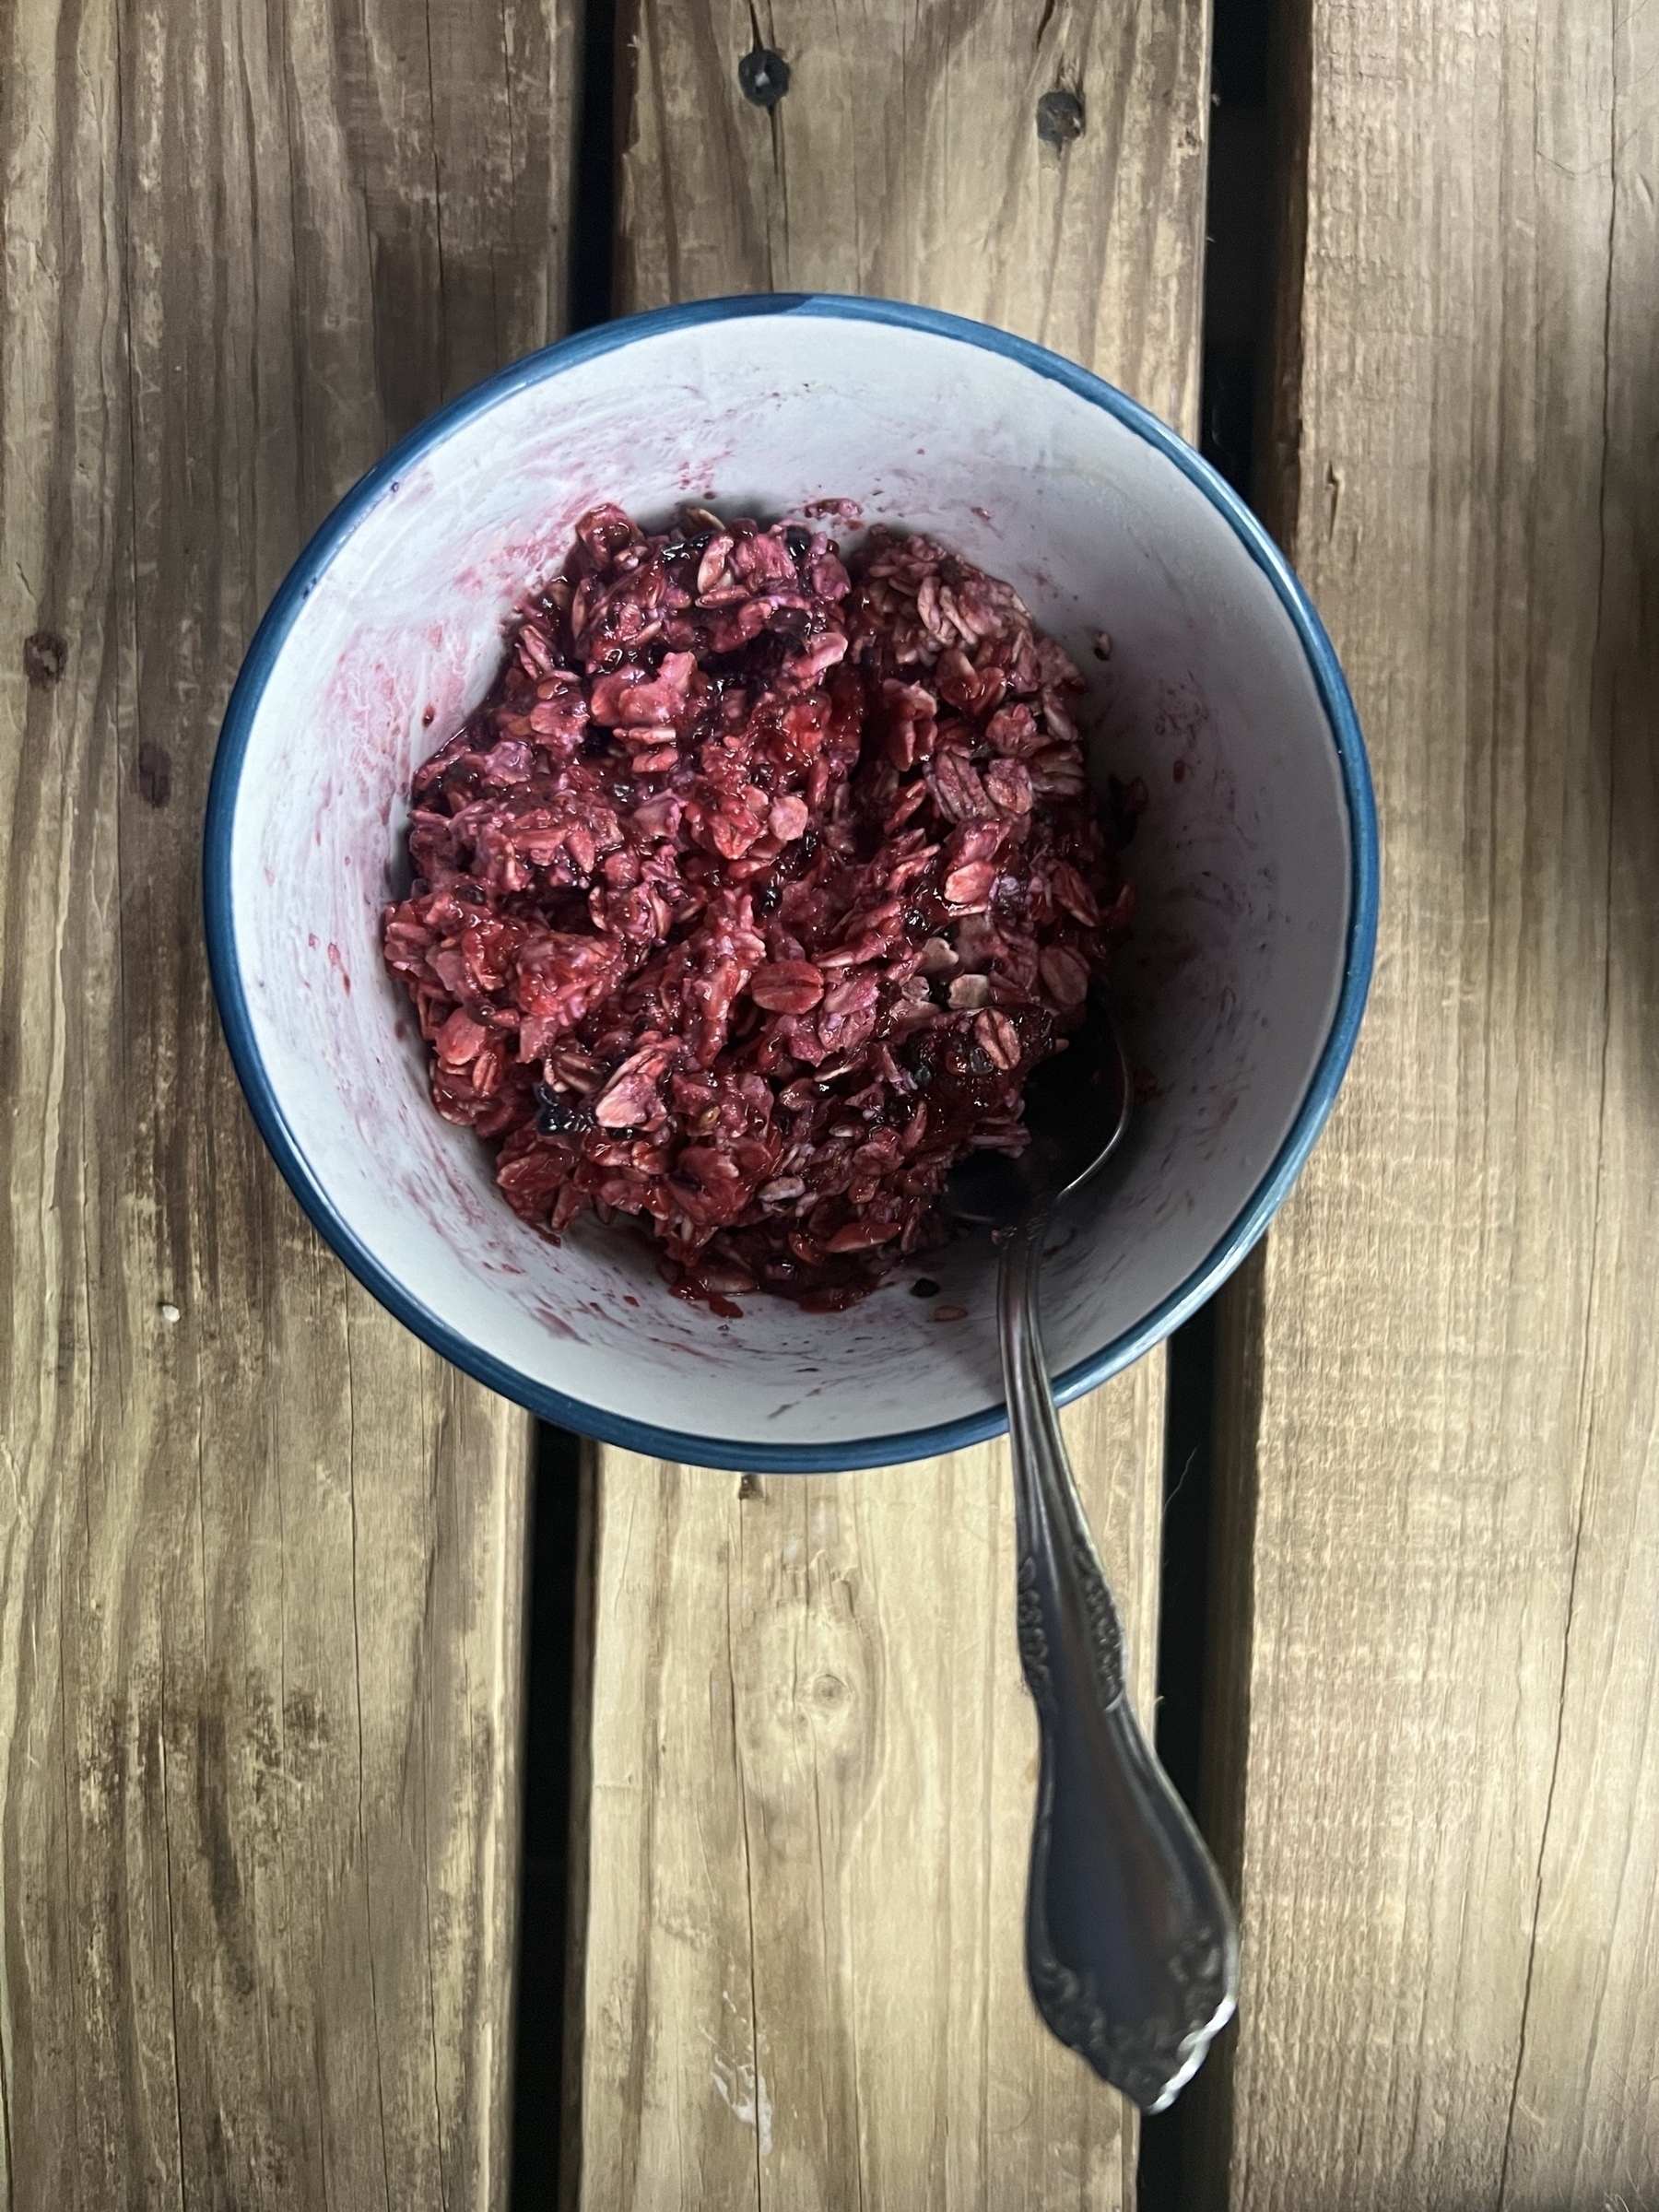 A bowl of cooked oatmeal that has been mixed with blackberries making the oatmeal a pleasant plum colored purple